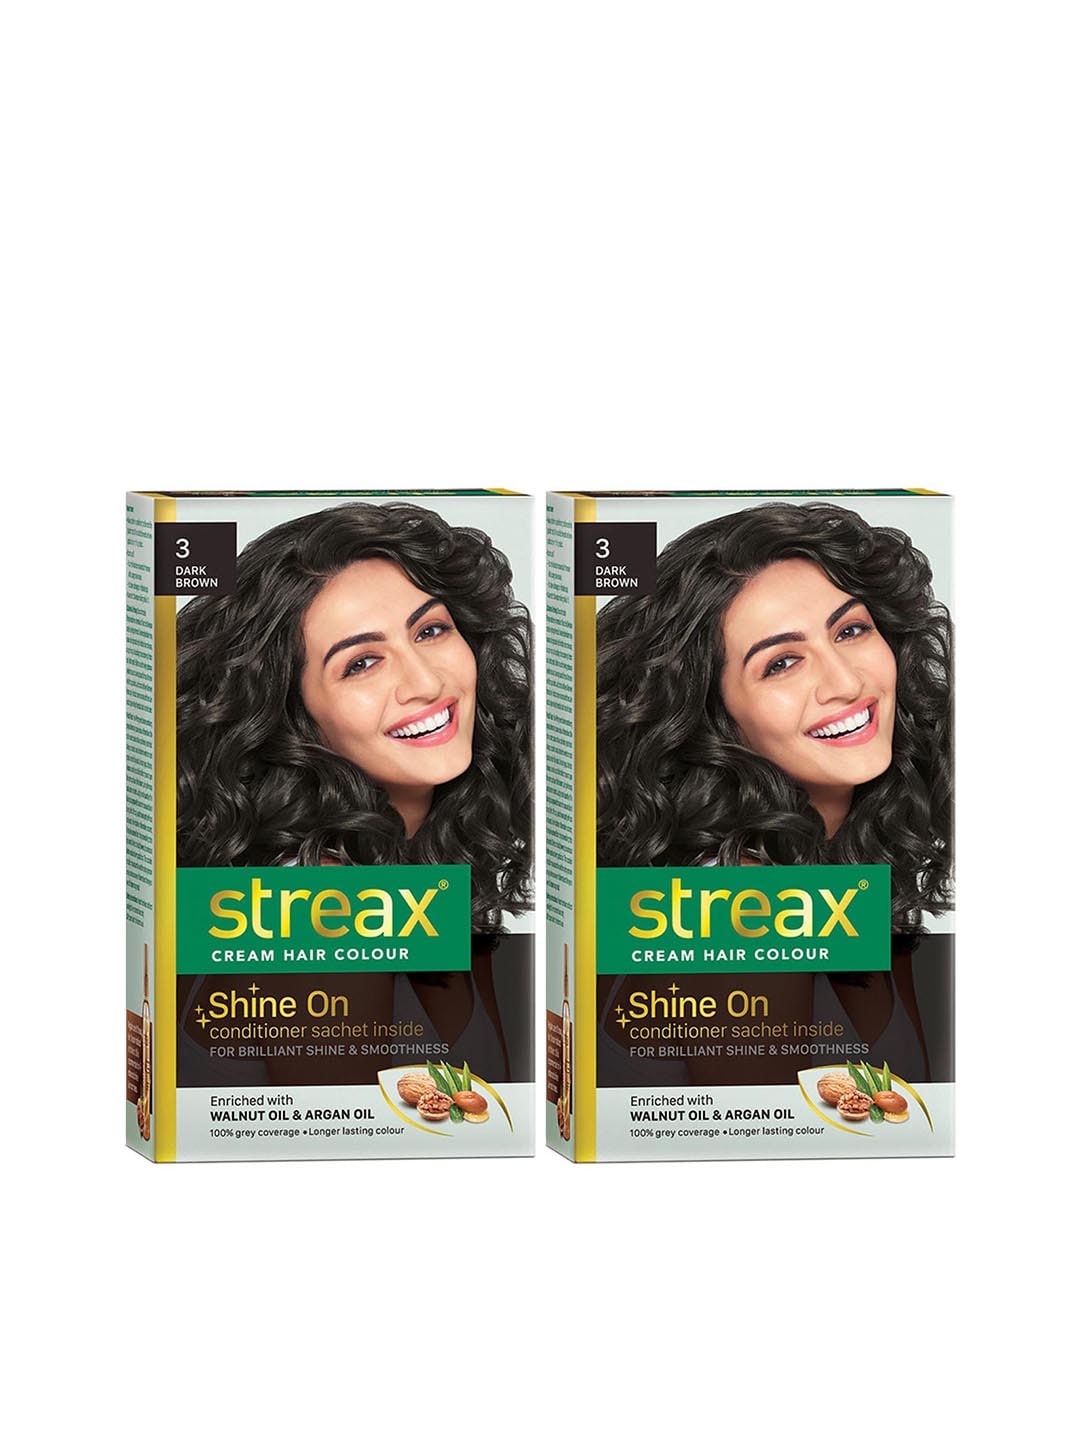 Streax Set of 2 Cream Hair Colours - 3 Dark Brown 120 ml Each Price in  India, Full Specifications & Offers 